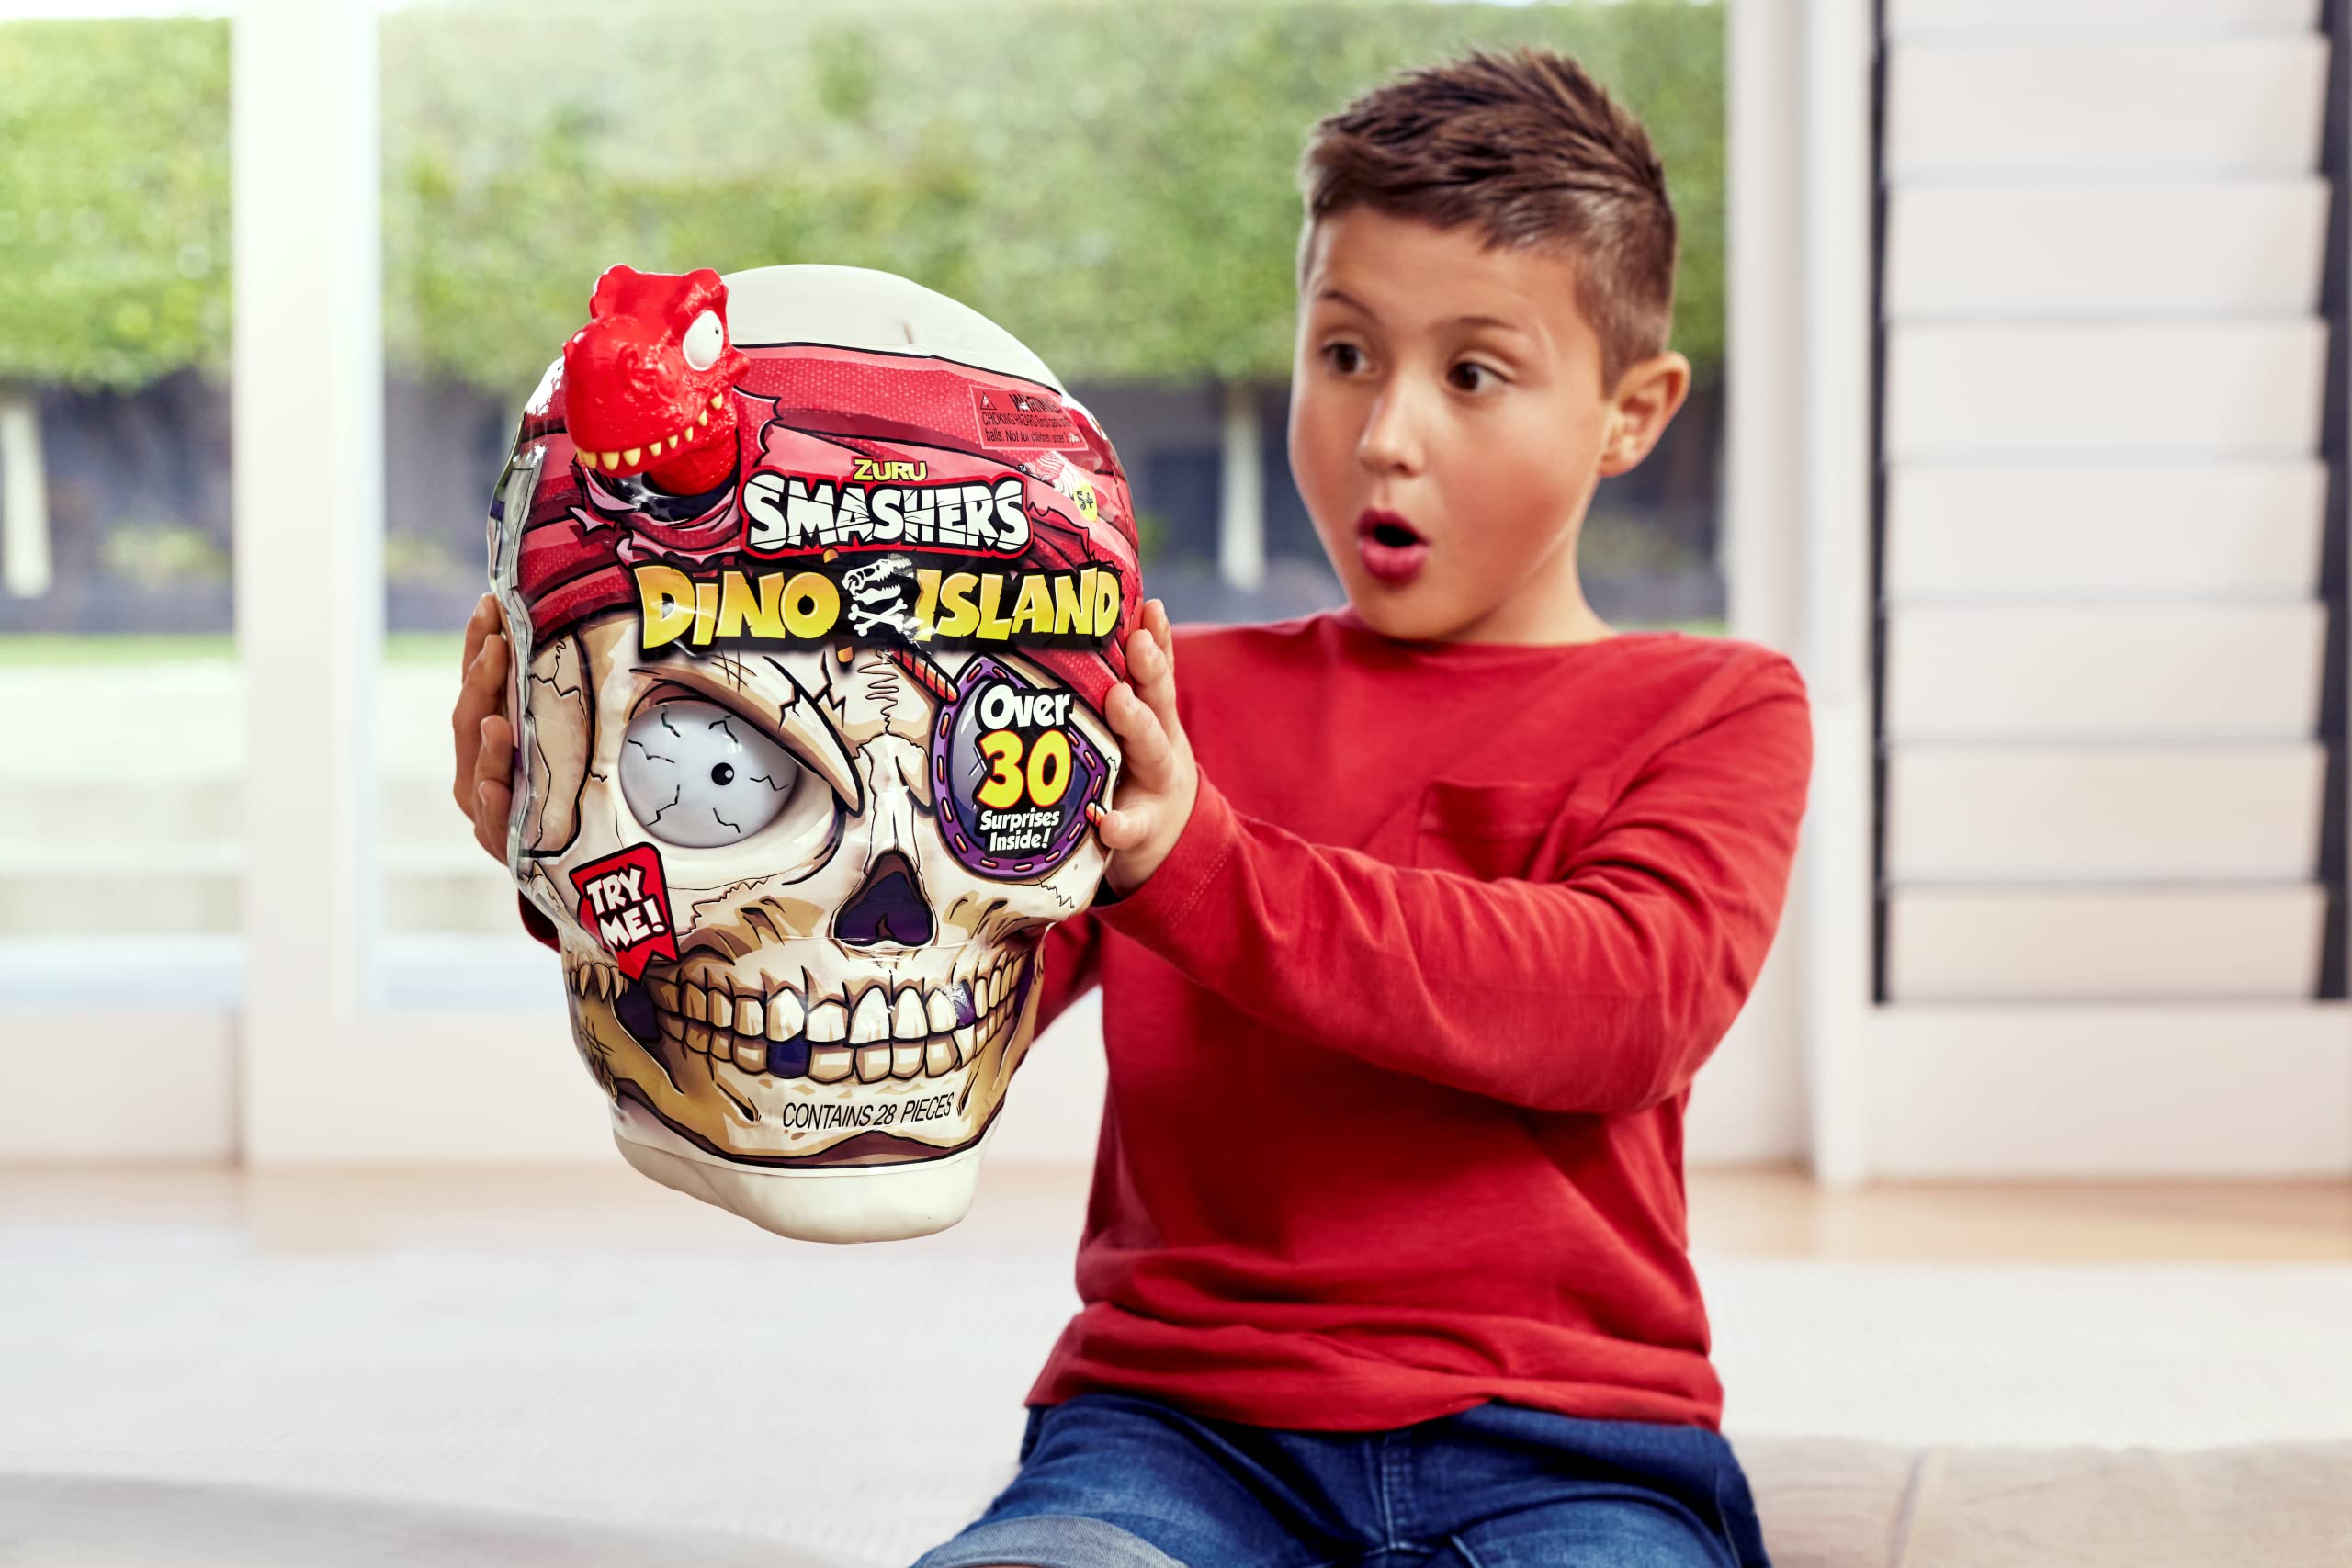 Smashers Dino Island Giant Skull by ZURU - Includes 30+ Surprises, Kids Toys Filled with Mini Dinosaur Toys, Slime, Sand, Eggs, Figurines and More (Megalodon Shark), Ages 5+